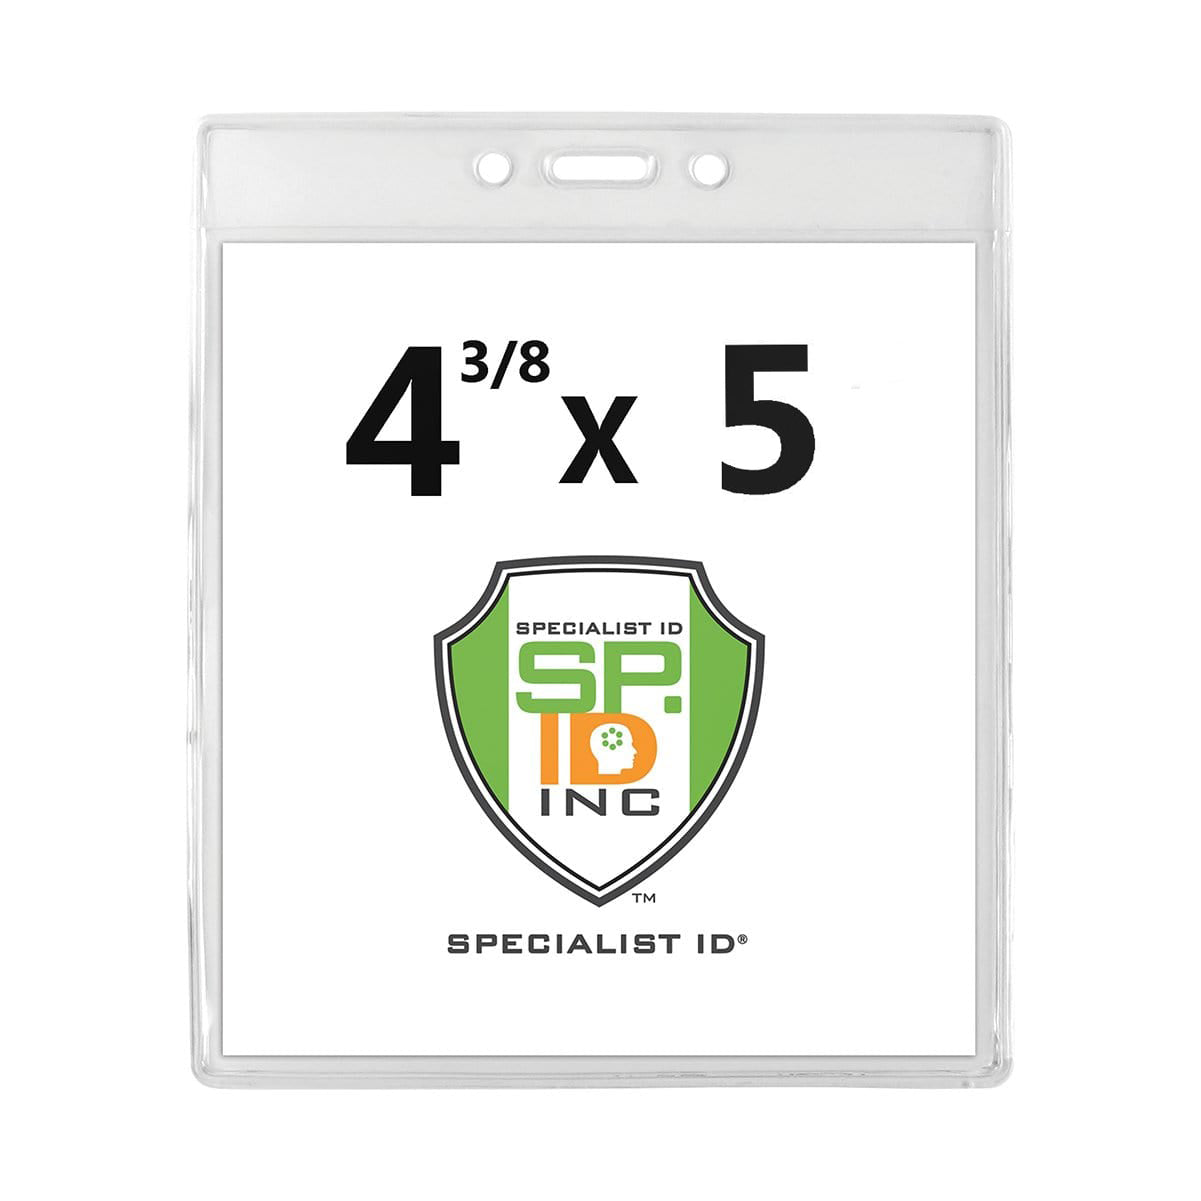 4 3/8 x 5 Clear Vertical Large Event Badge Holder (P/N 306-4755) and more  Large Event Badge Holders at